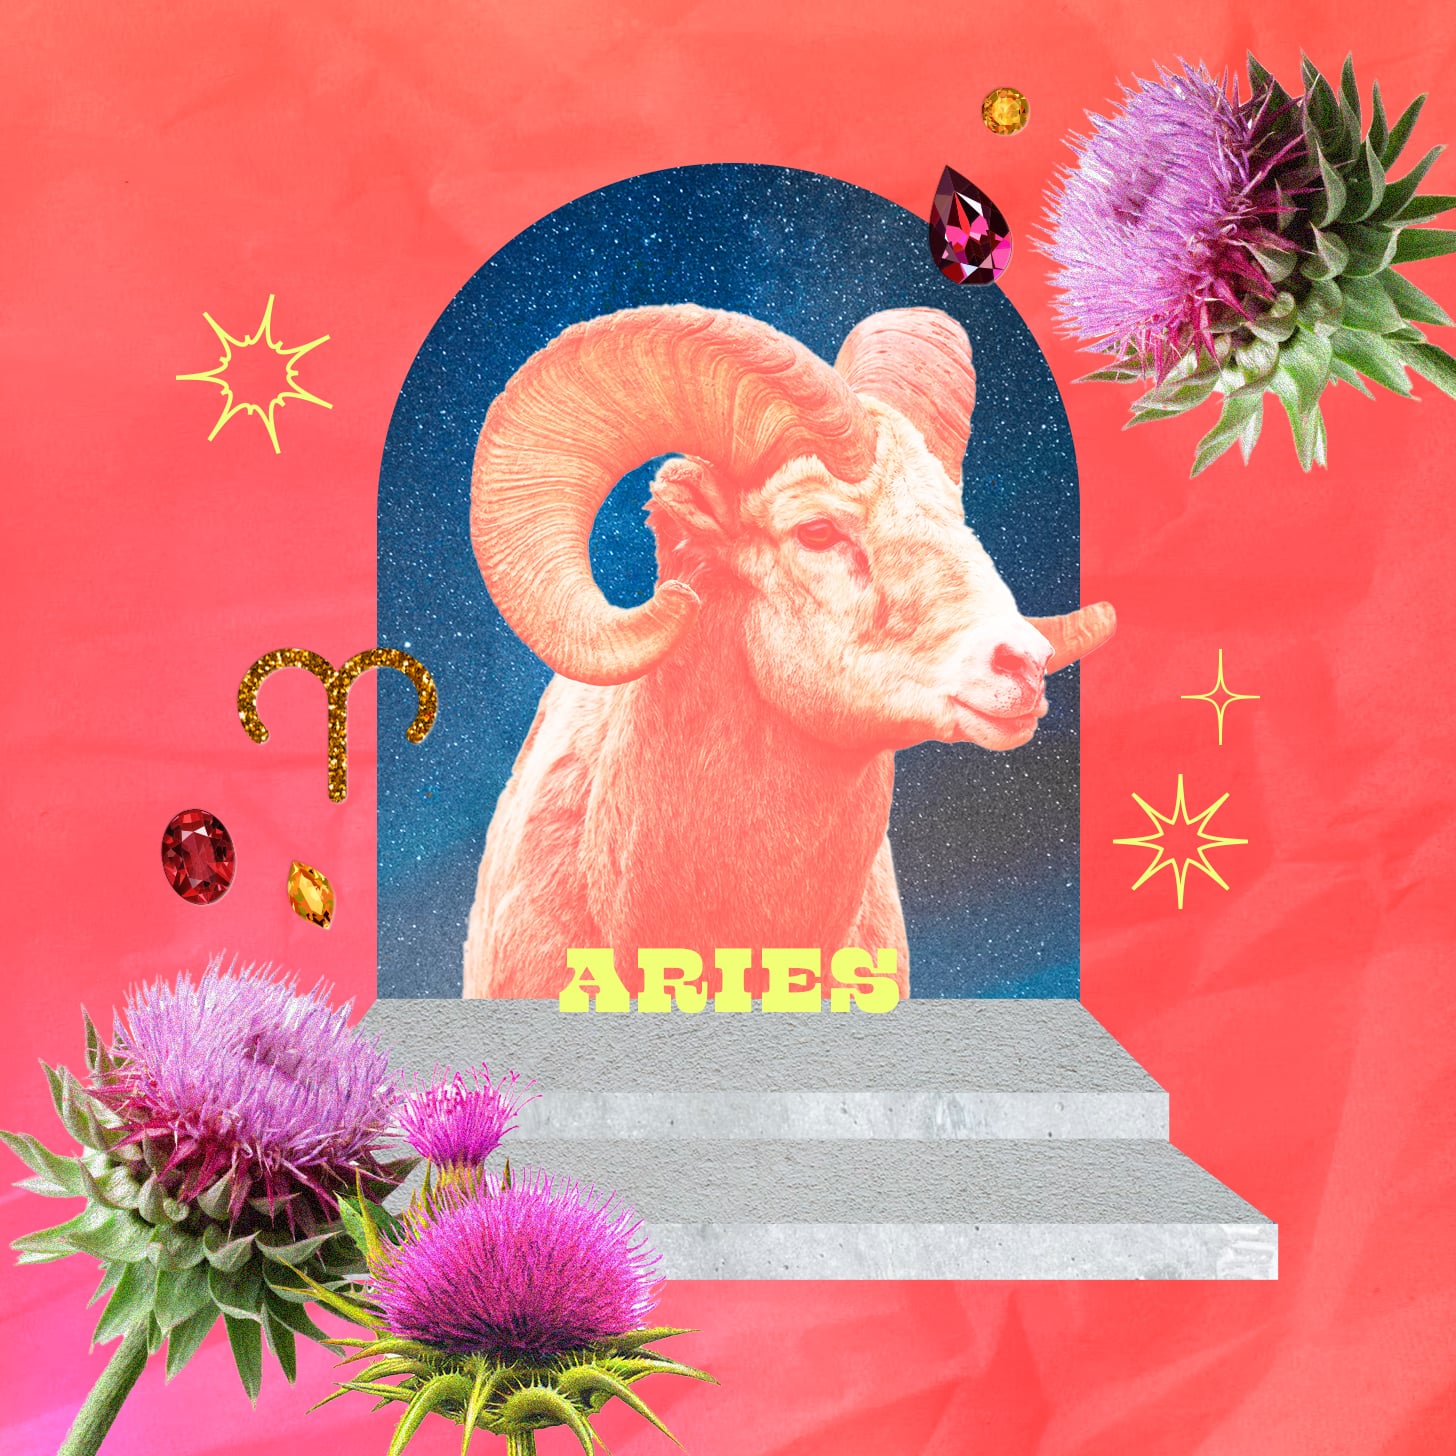 aries weekly horoscope for june 26, 2022